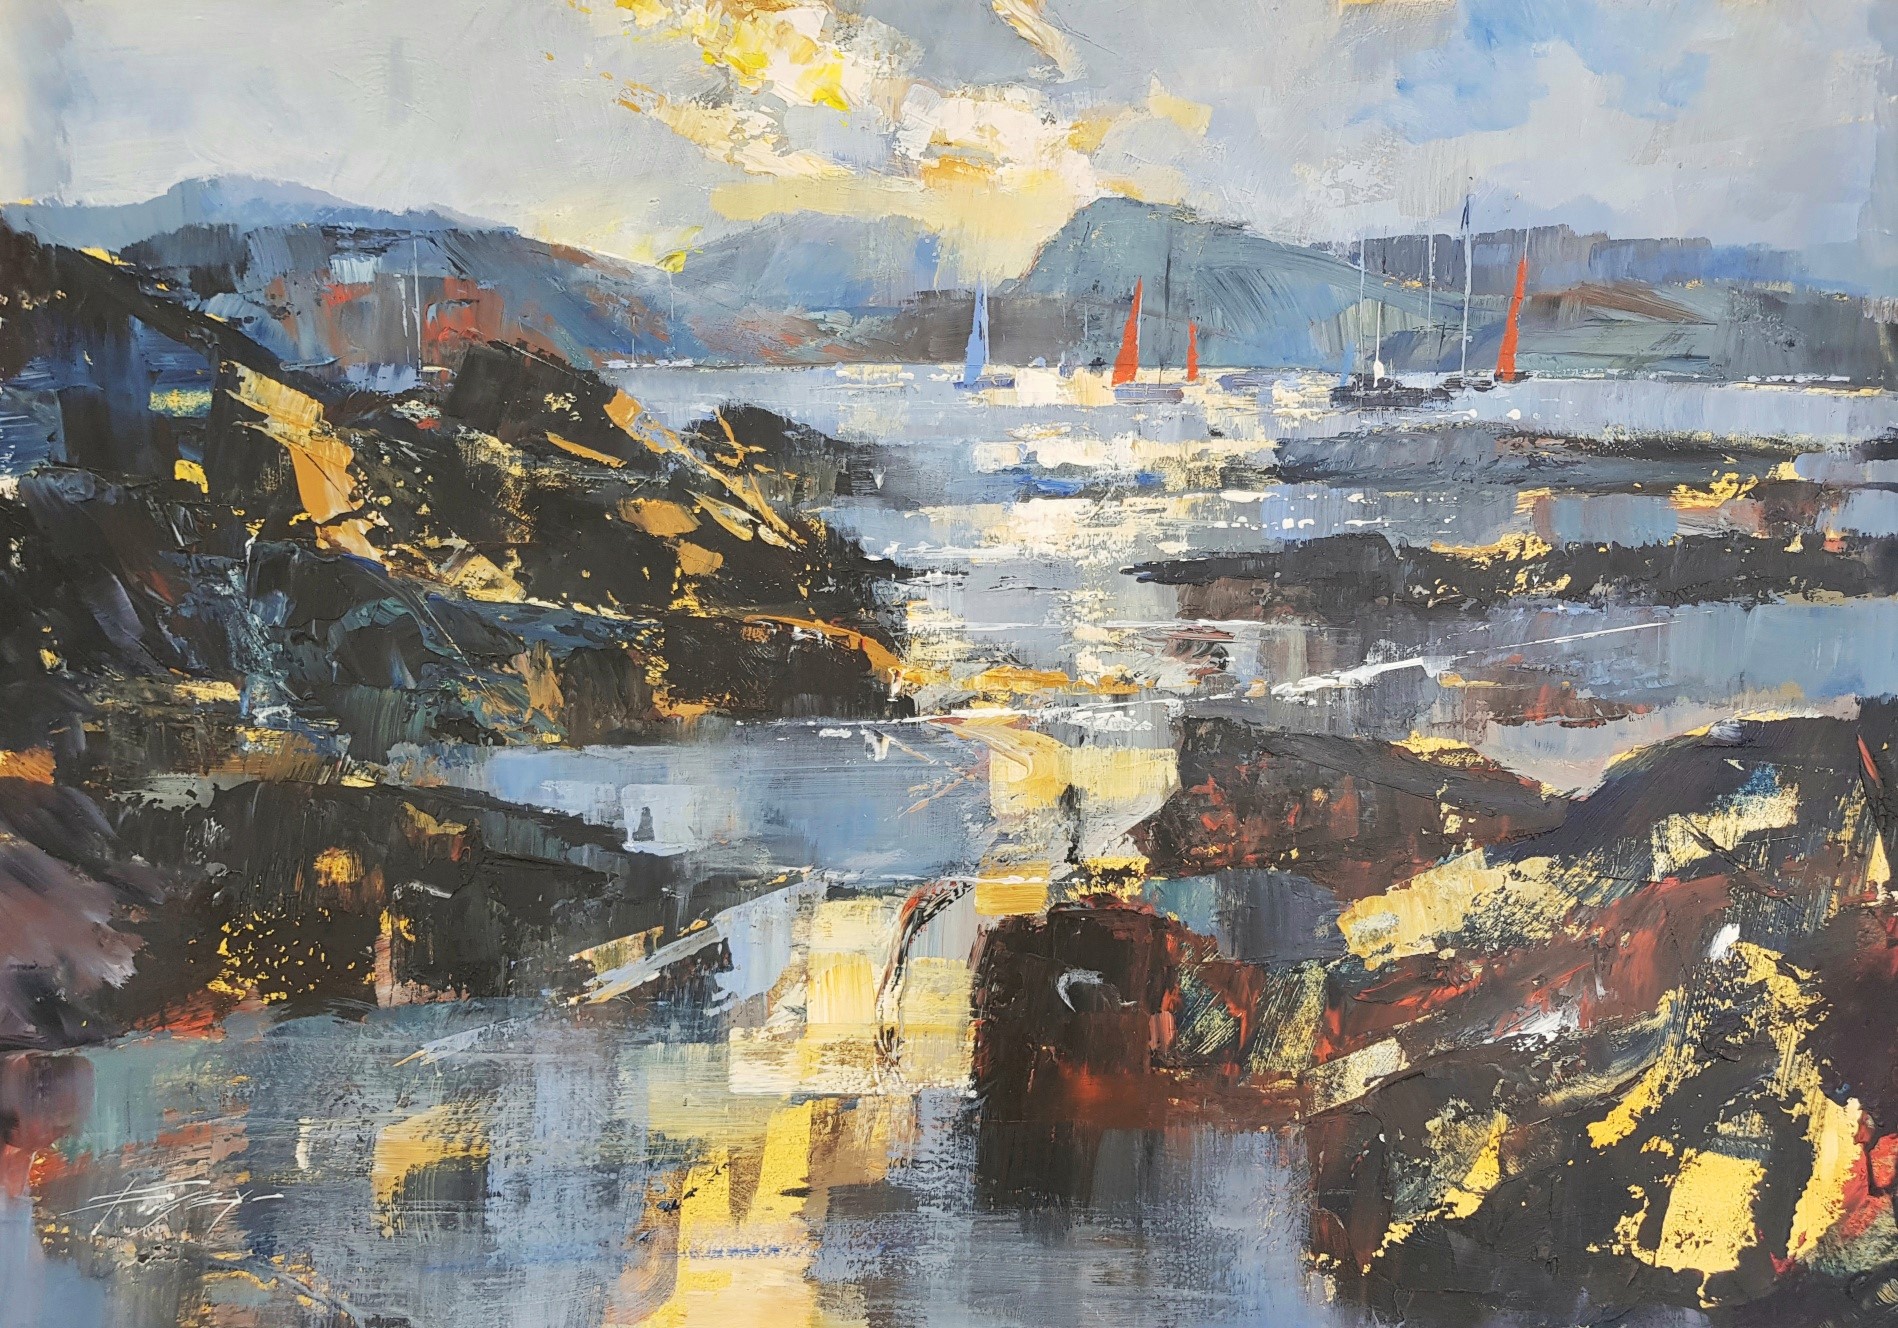 'Rocks and Sails on the Loch' by artist Chris Forsey